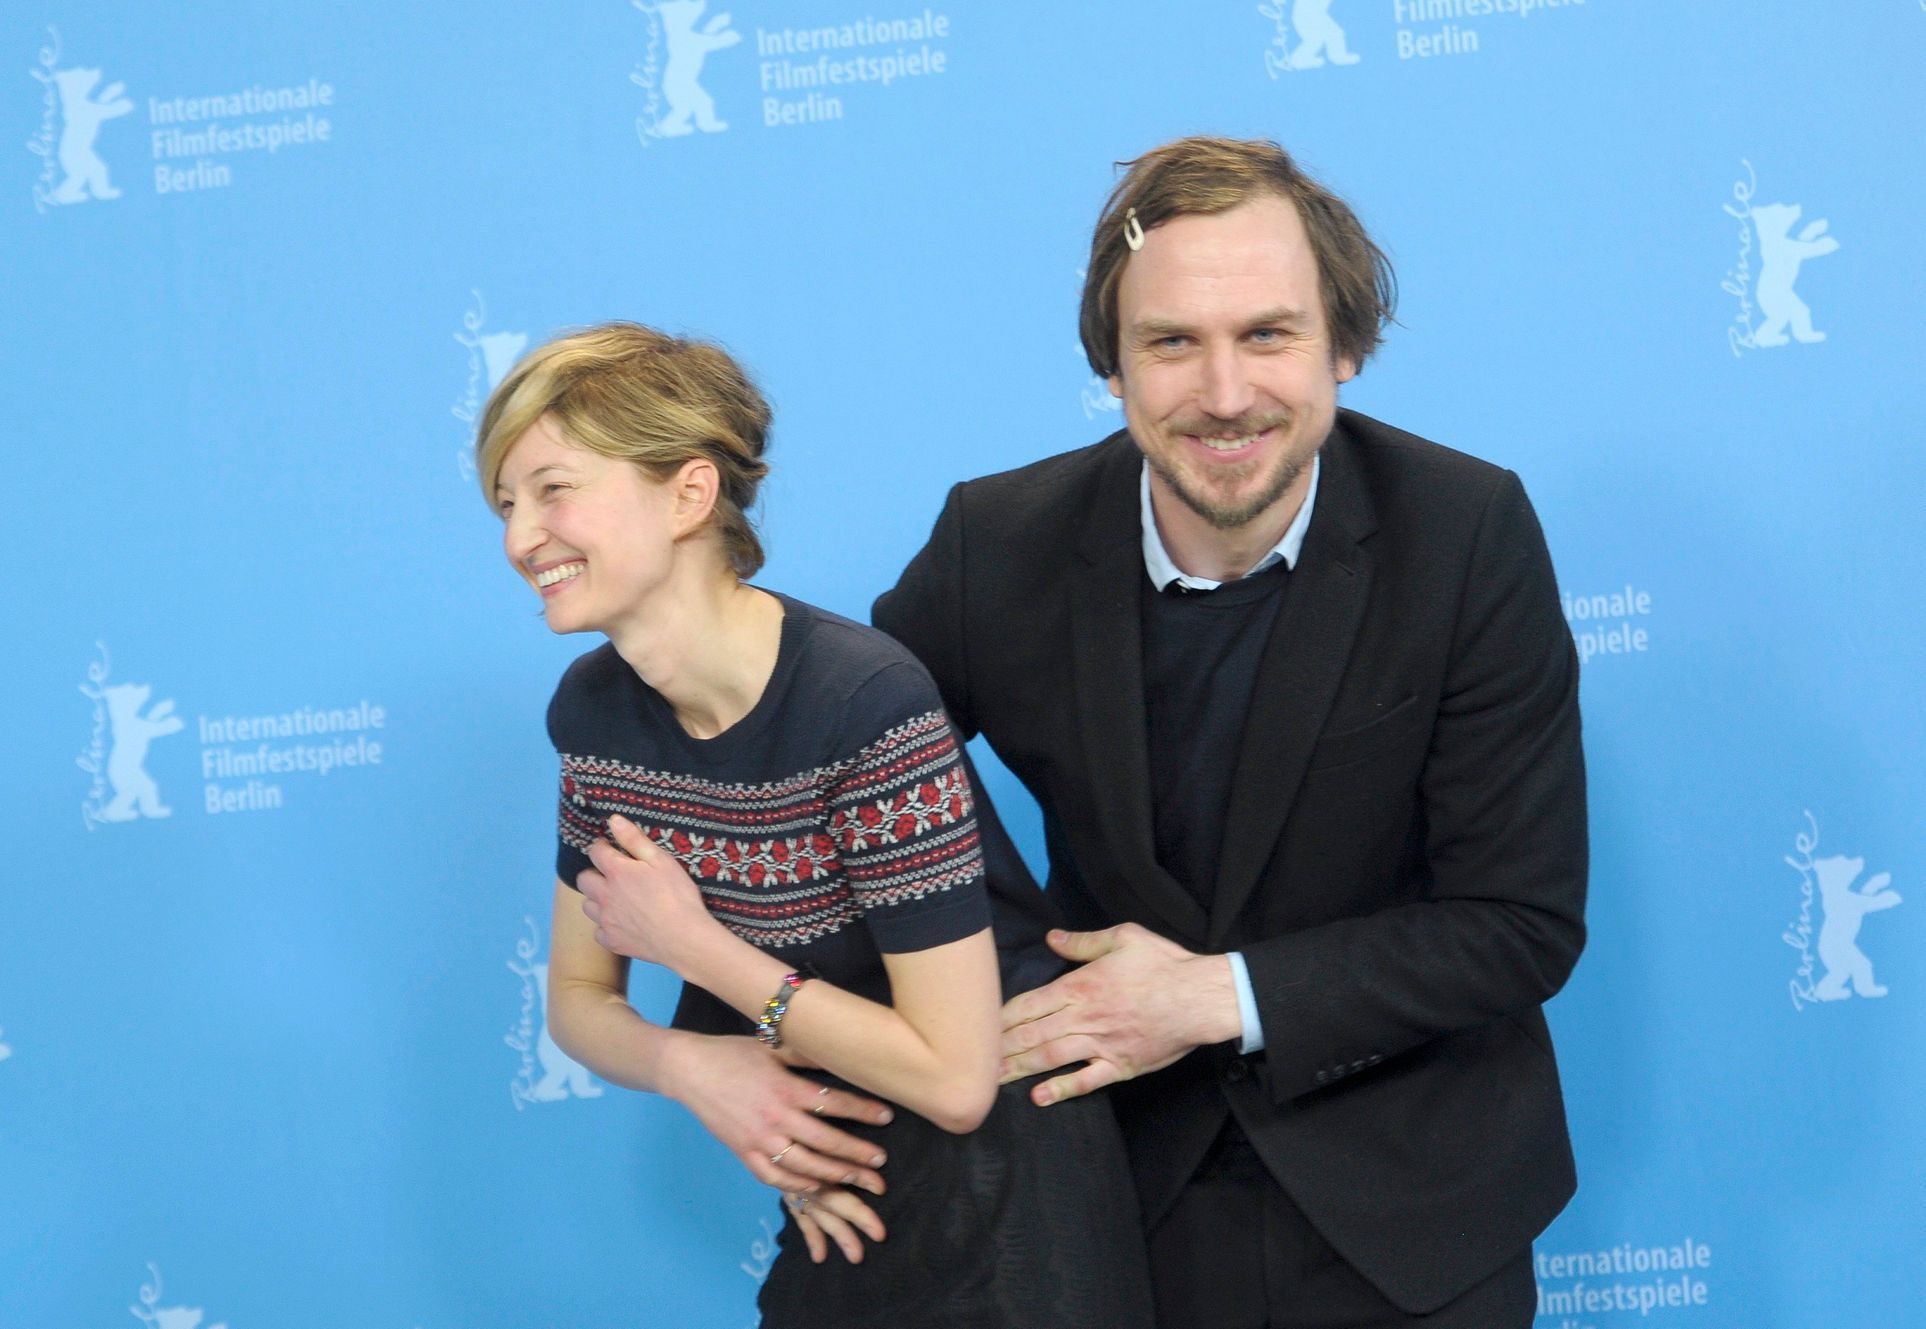 Actors Rohrwacher and Eidinger joke during photocall at 65th Berlinale International Film Festival in Berlin